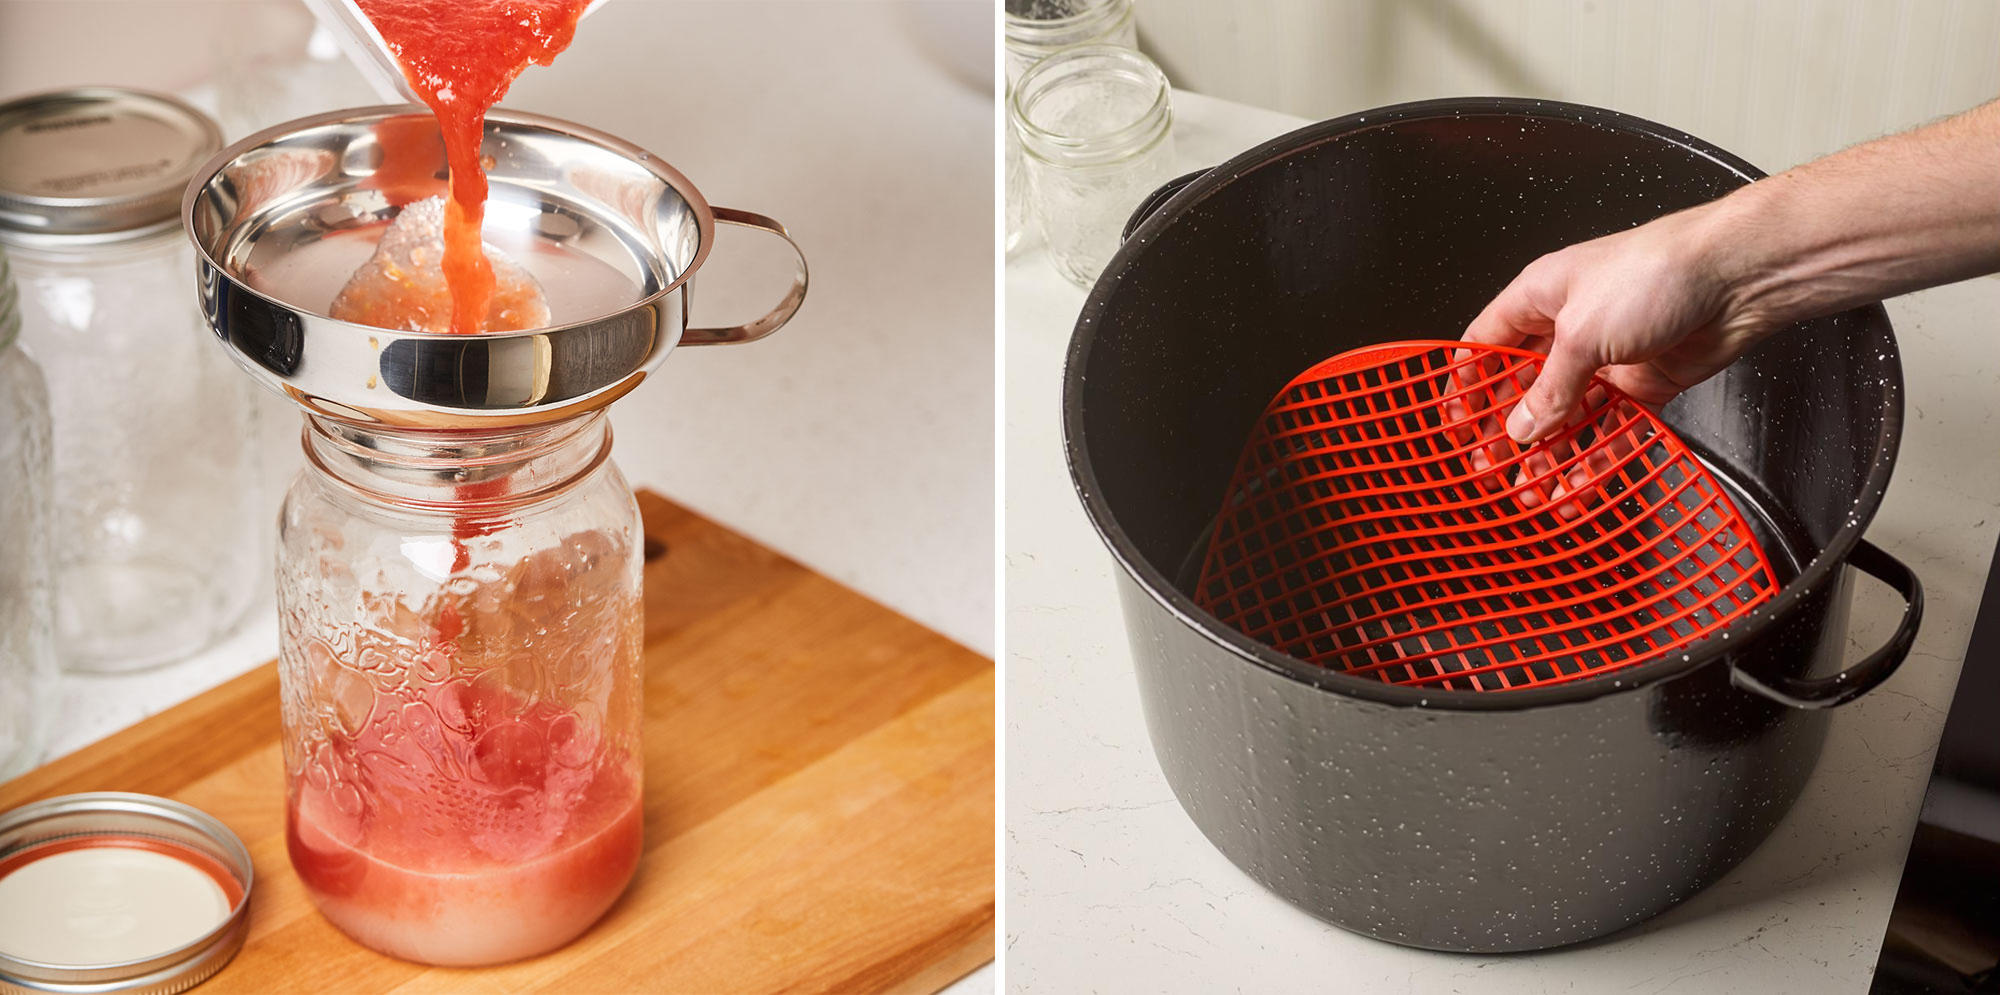 Image left: Using a funnel to pour tomato paste into a jar with lemon juice. Image right: Silicone Canning Rack